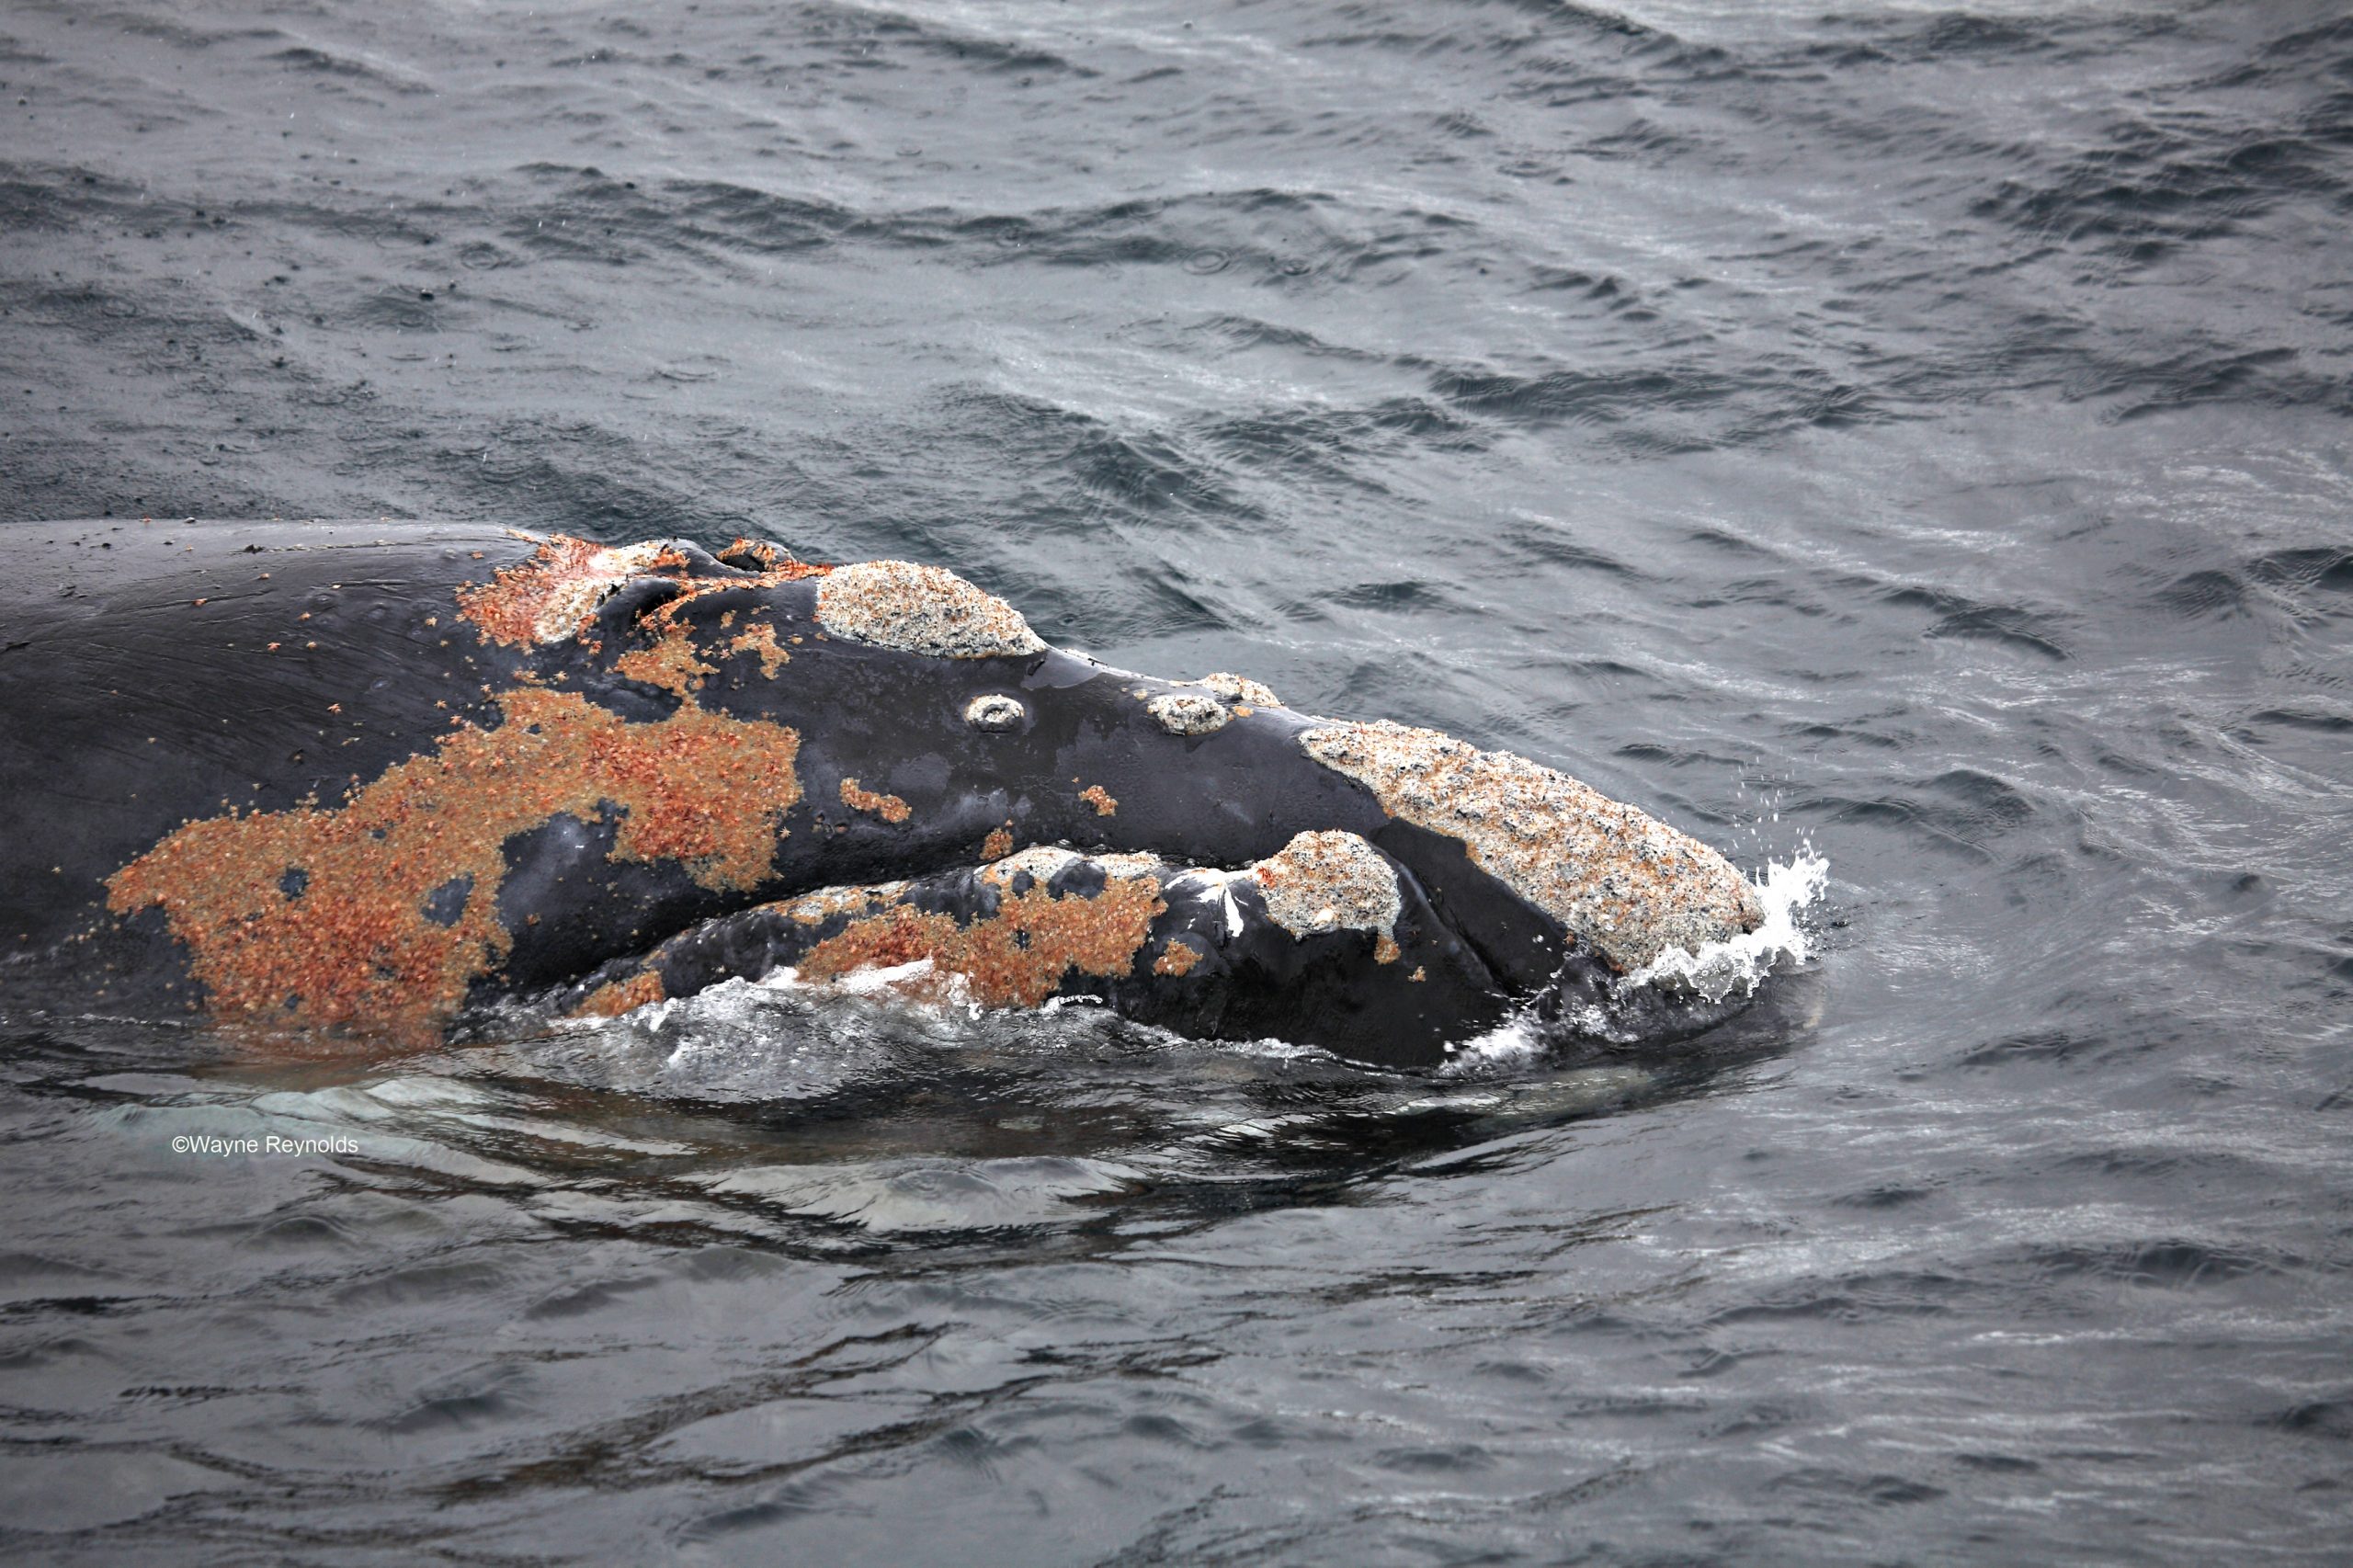 Southern Right Whale (Eubalaena australis) Callosities on the rostrum or head. Photo: Wayne Reynolds